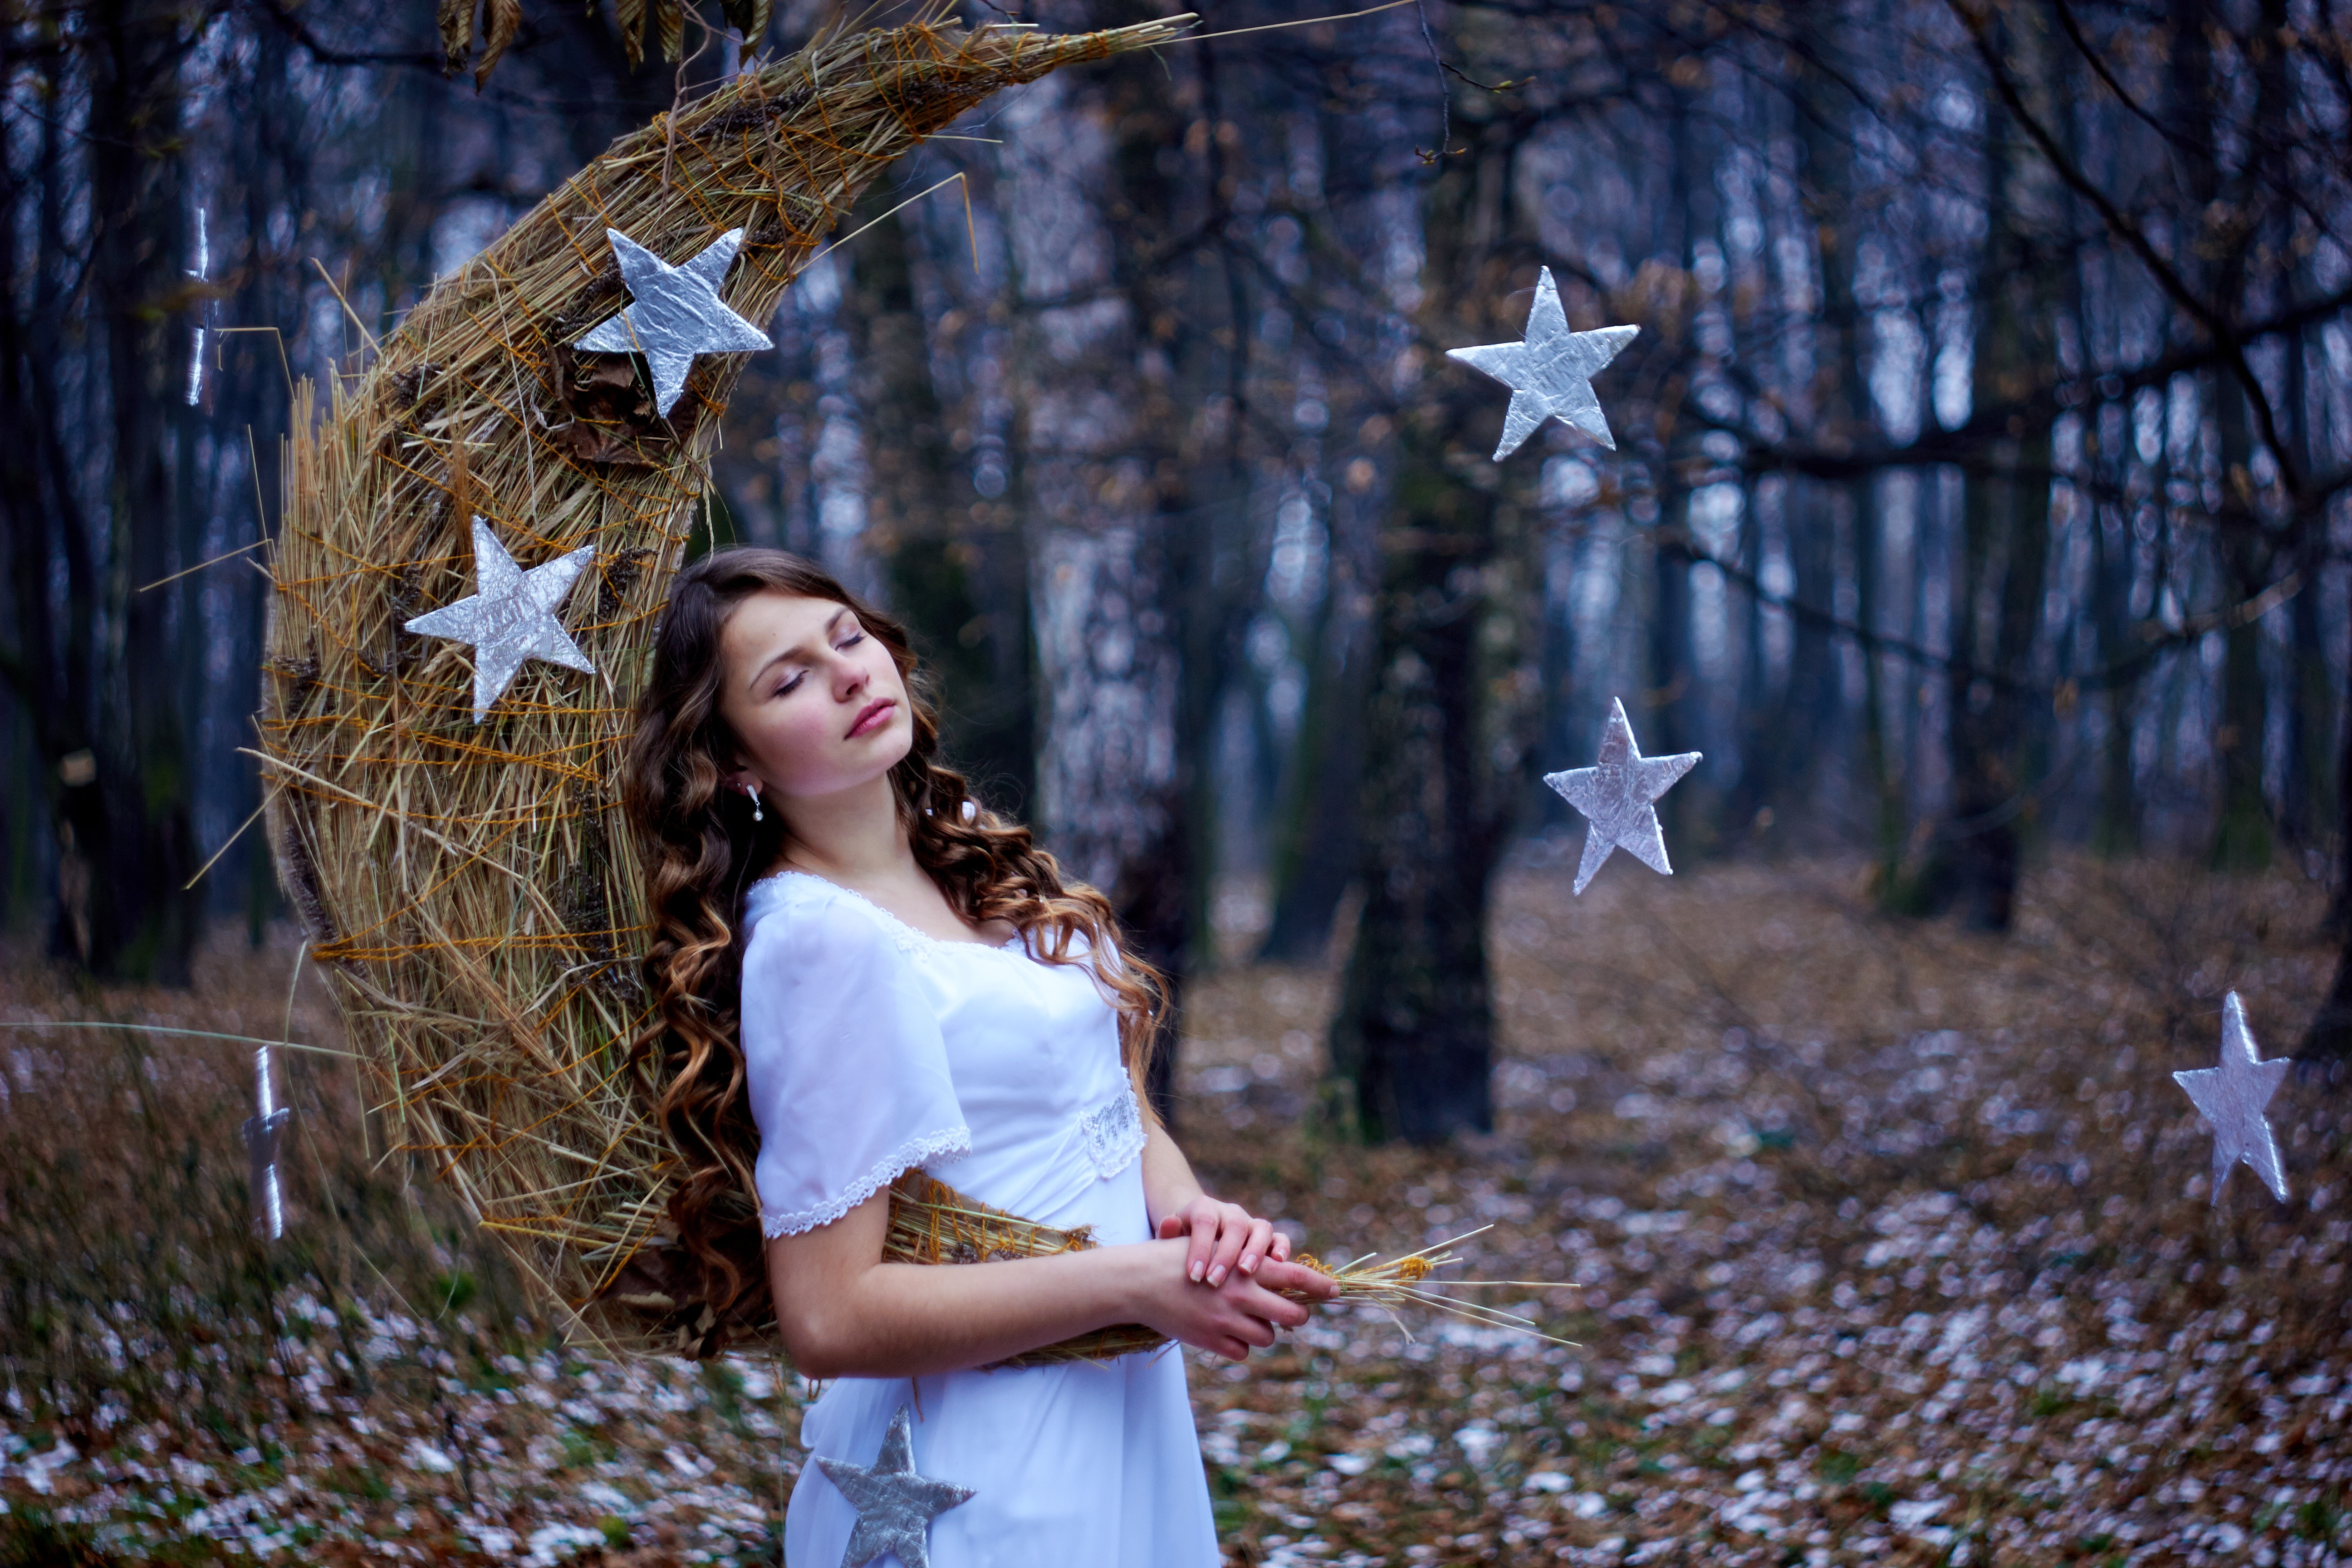 Beautiful young girl with brown curly hair. White dress on the perfect figure of the model. Month, handmade stars made of straw, cardboard, foil. New Year fairy tale, magic motive in the winter forest.